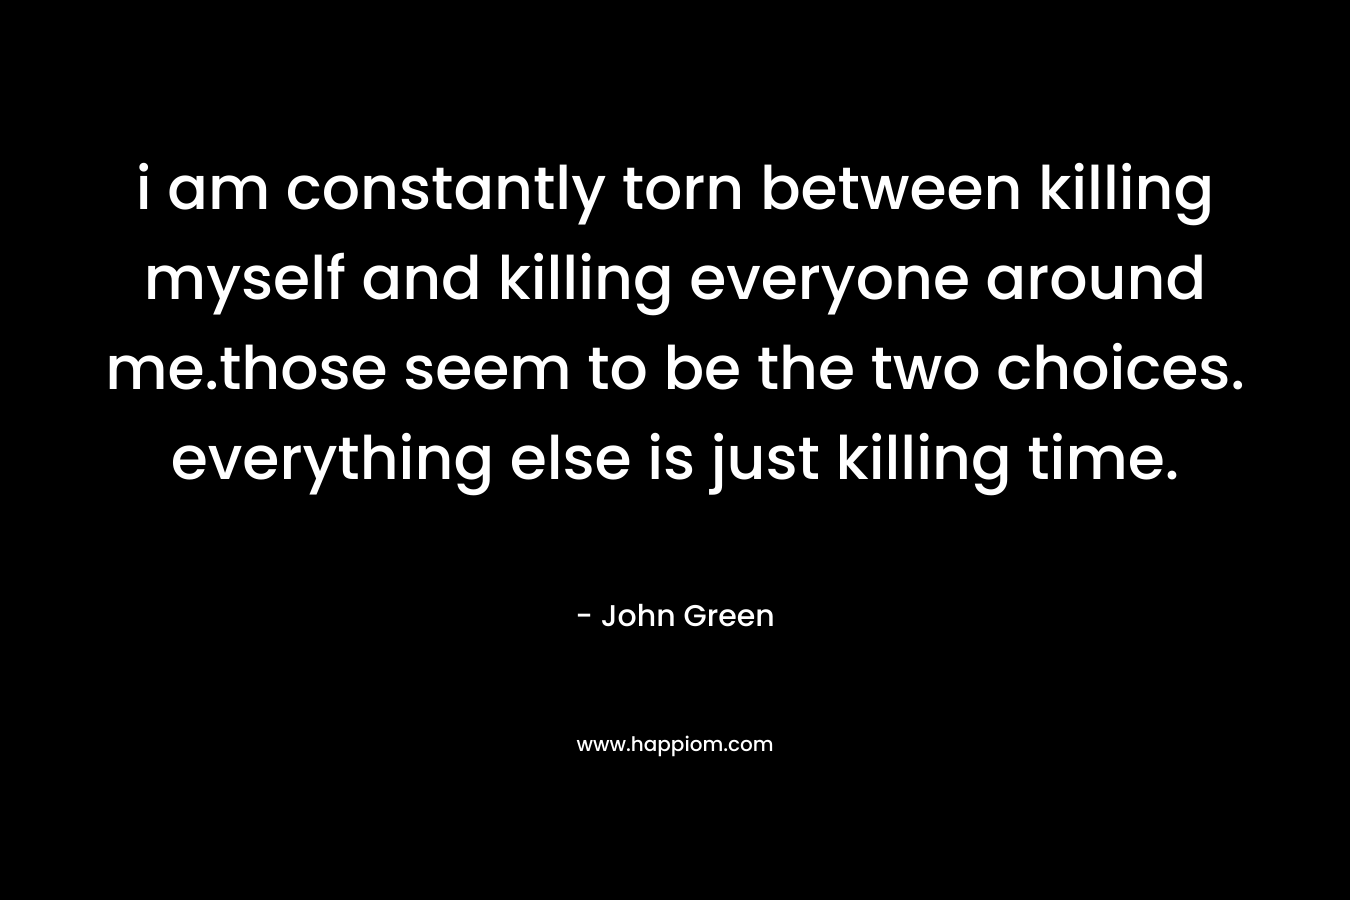 i am constantly torn between killing myself and killing everyone around me.those seem to be the two choices. everything else is just killing time. – John Green